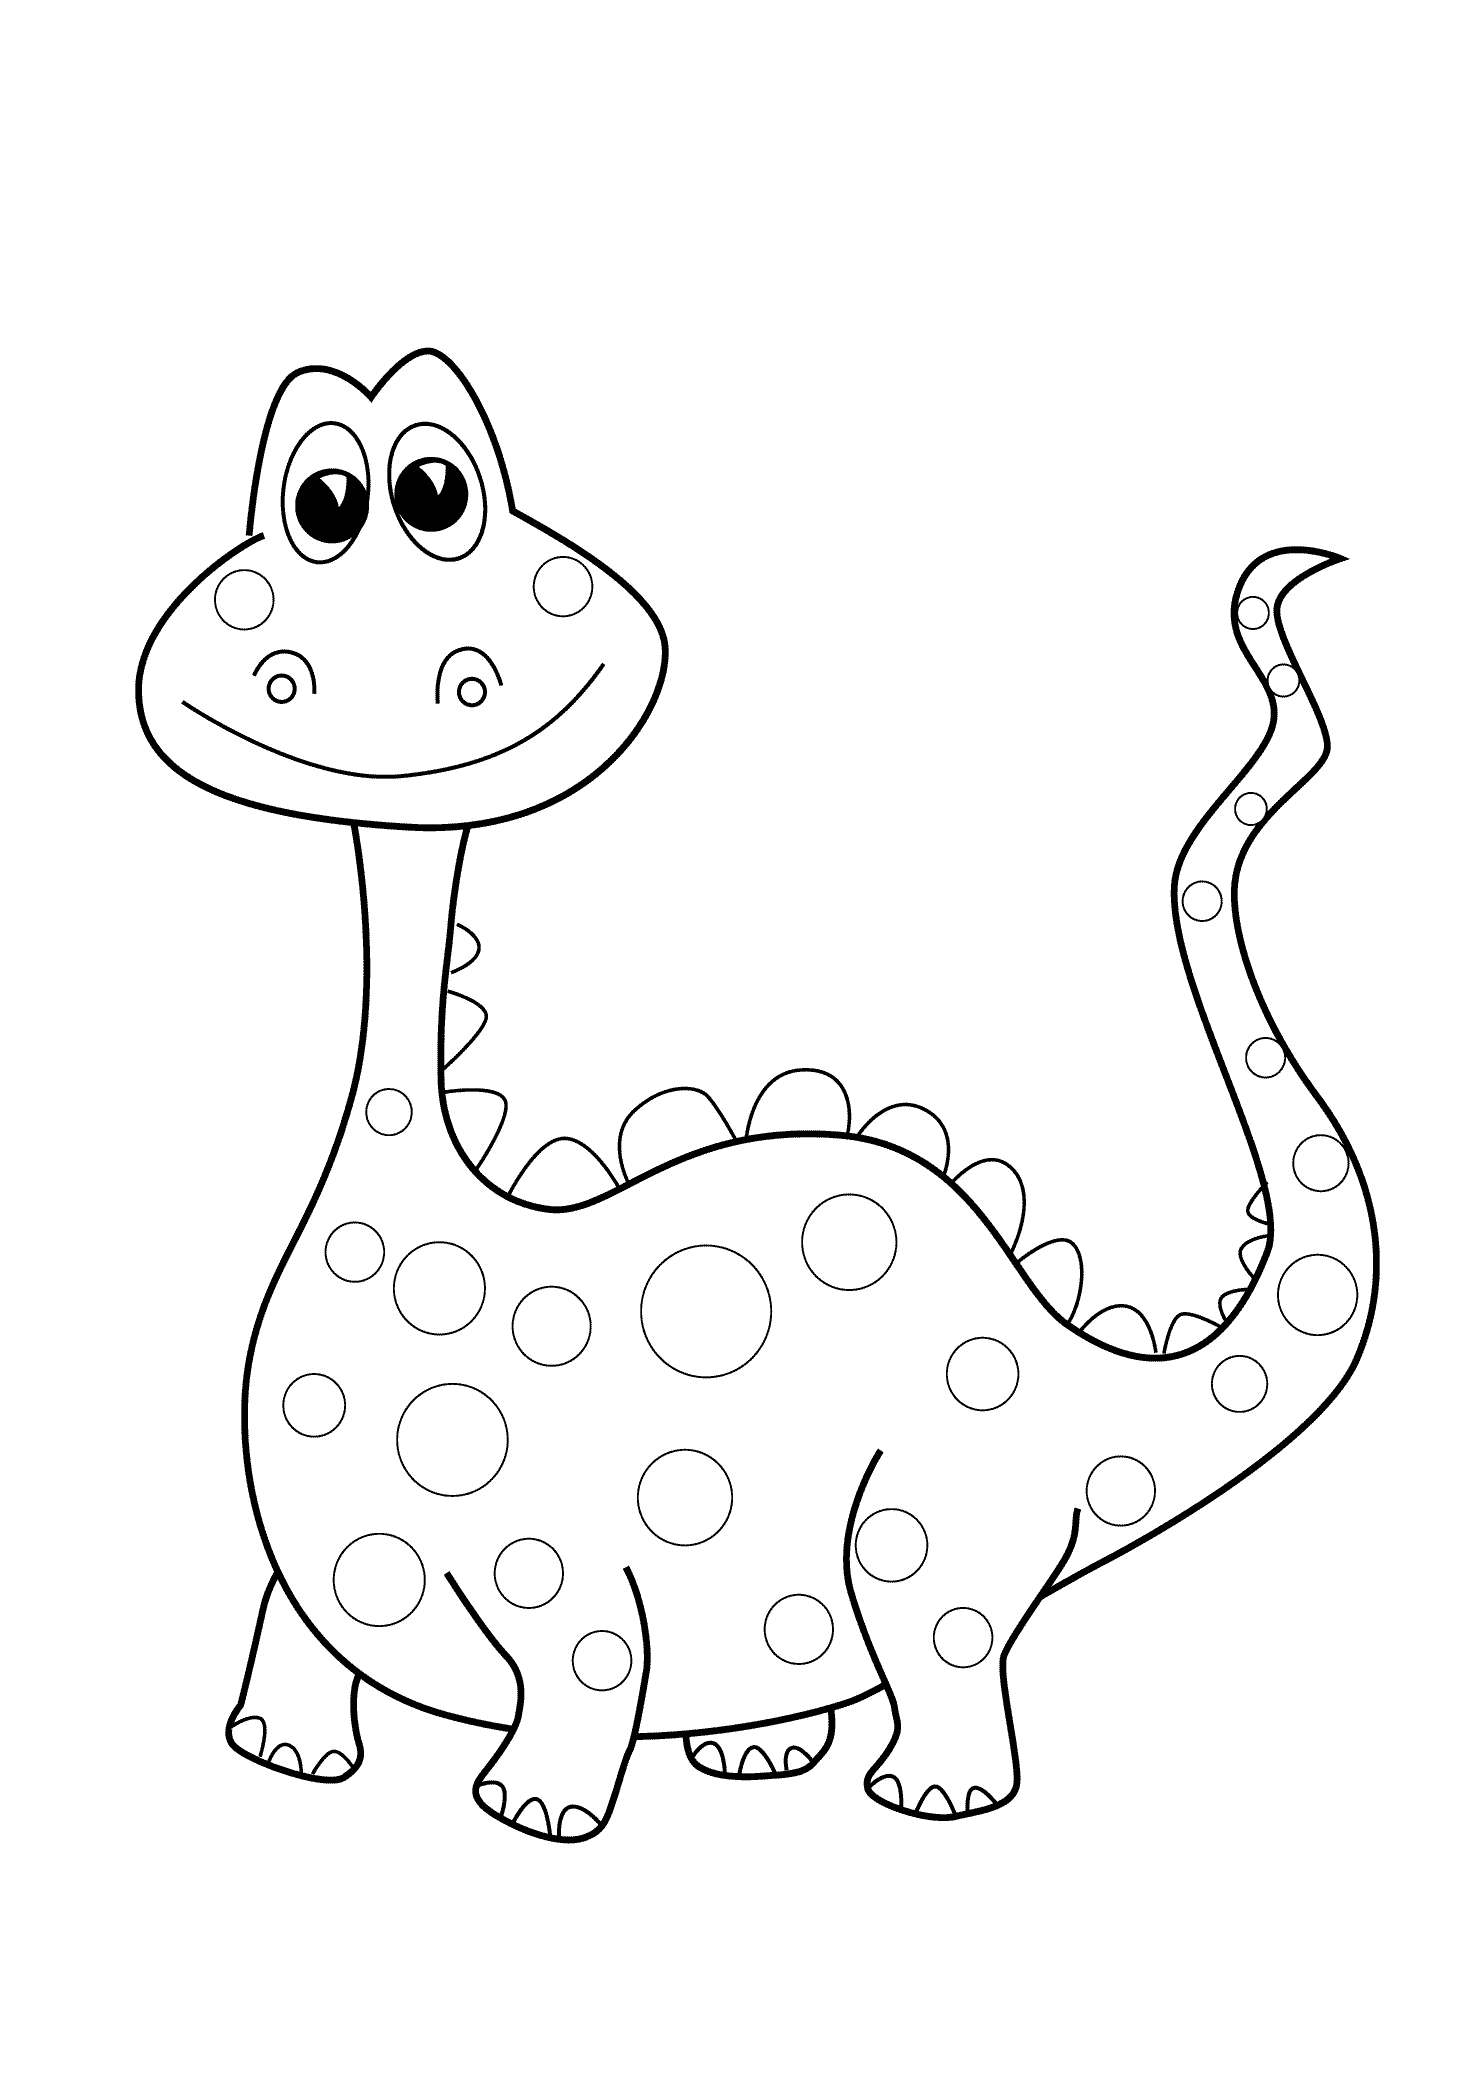 Preschool Coloring Pages Dinosaurs